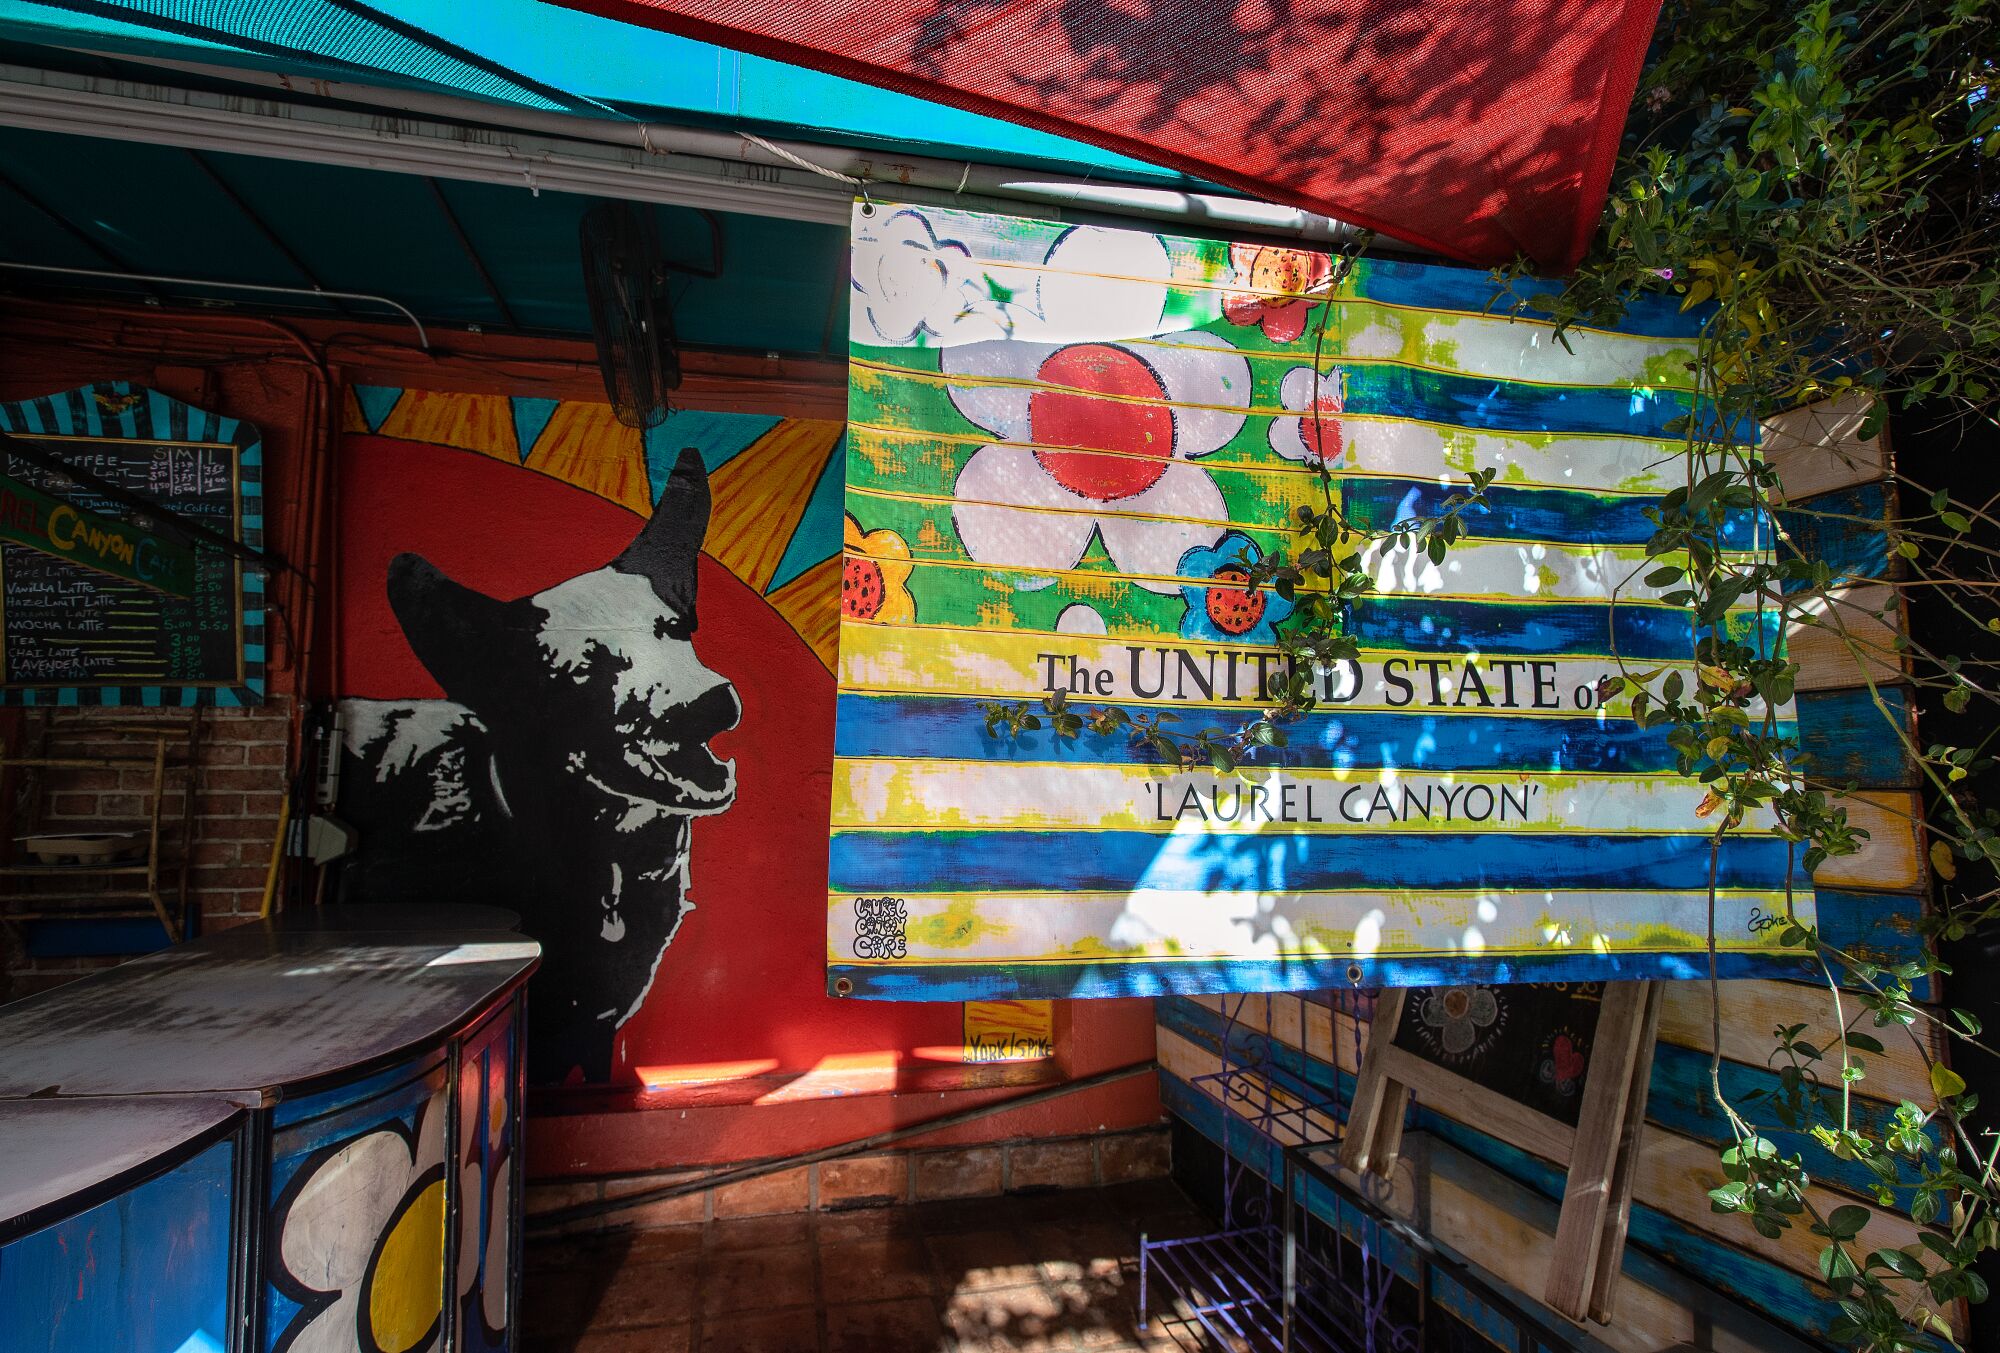 A colorful flag with a flower and the words "The United State of Laurel Canyon" hangs outside a store.